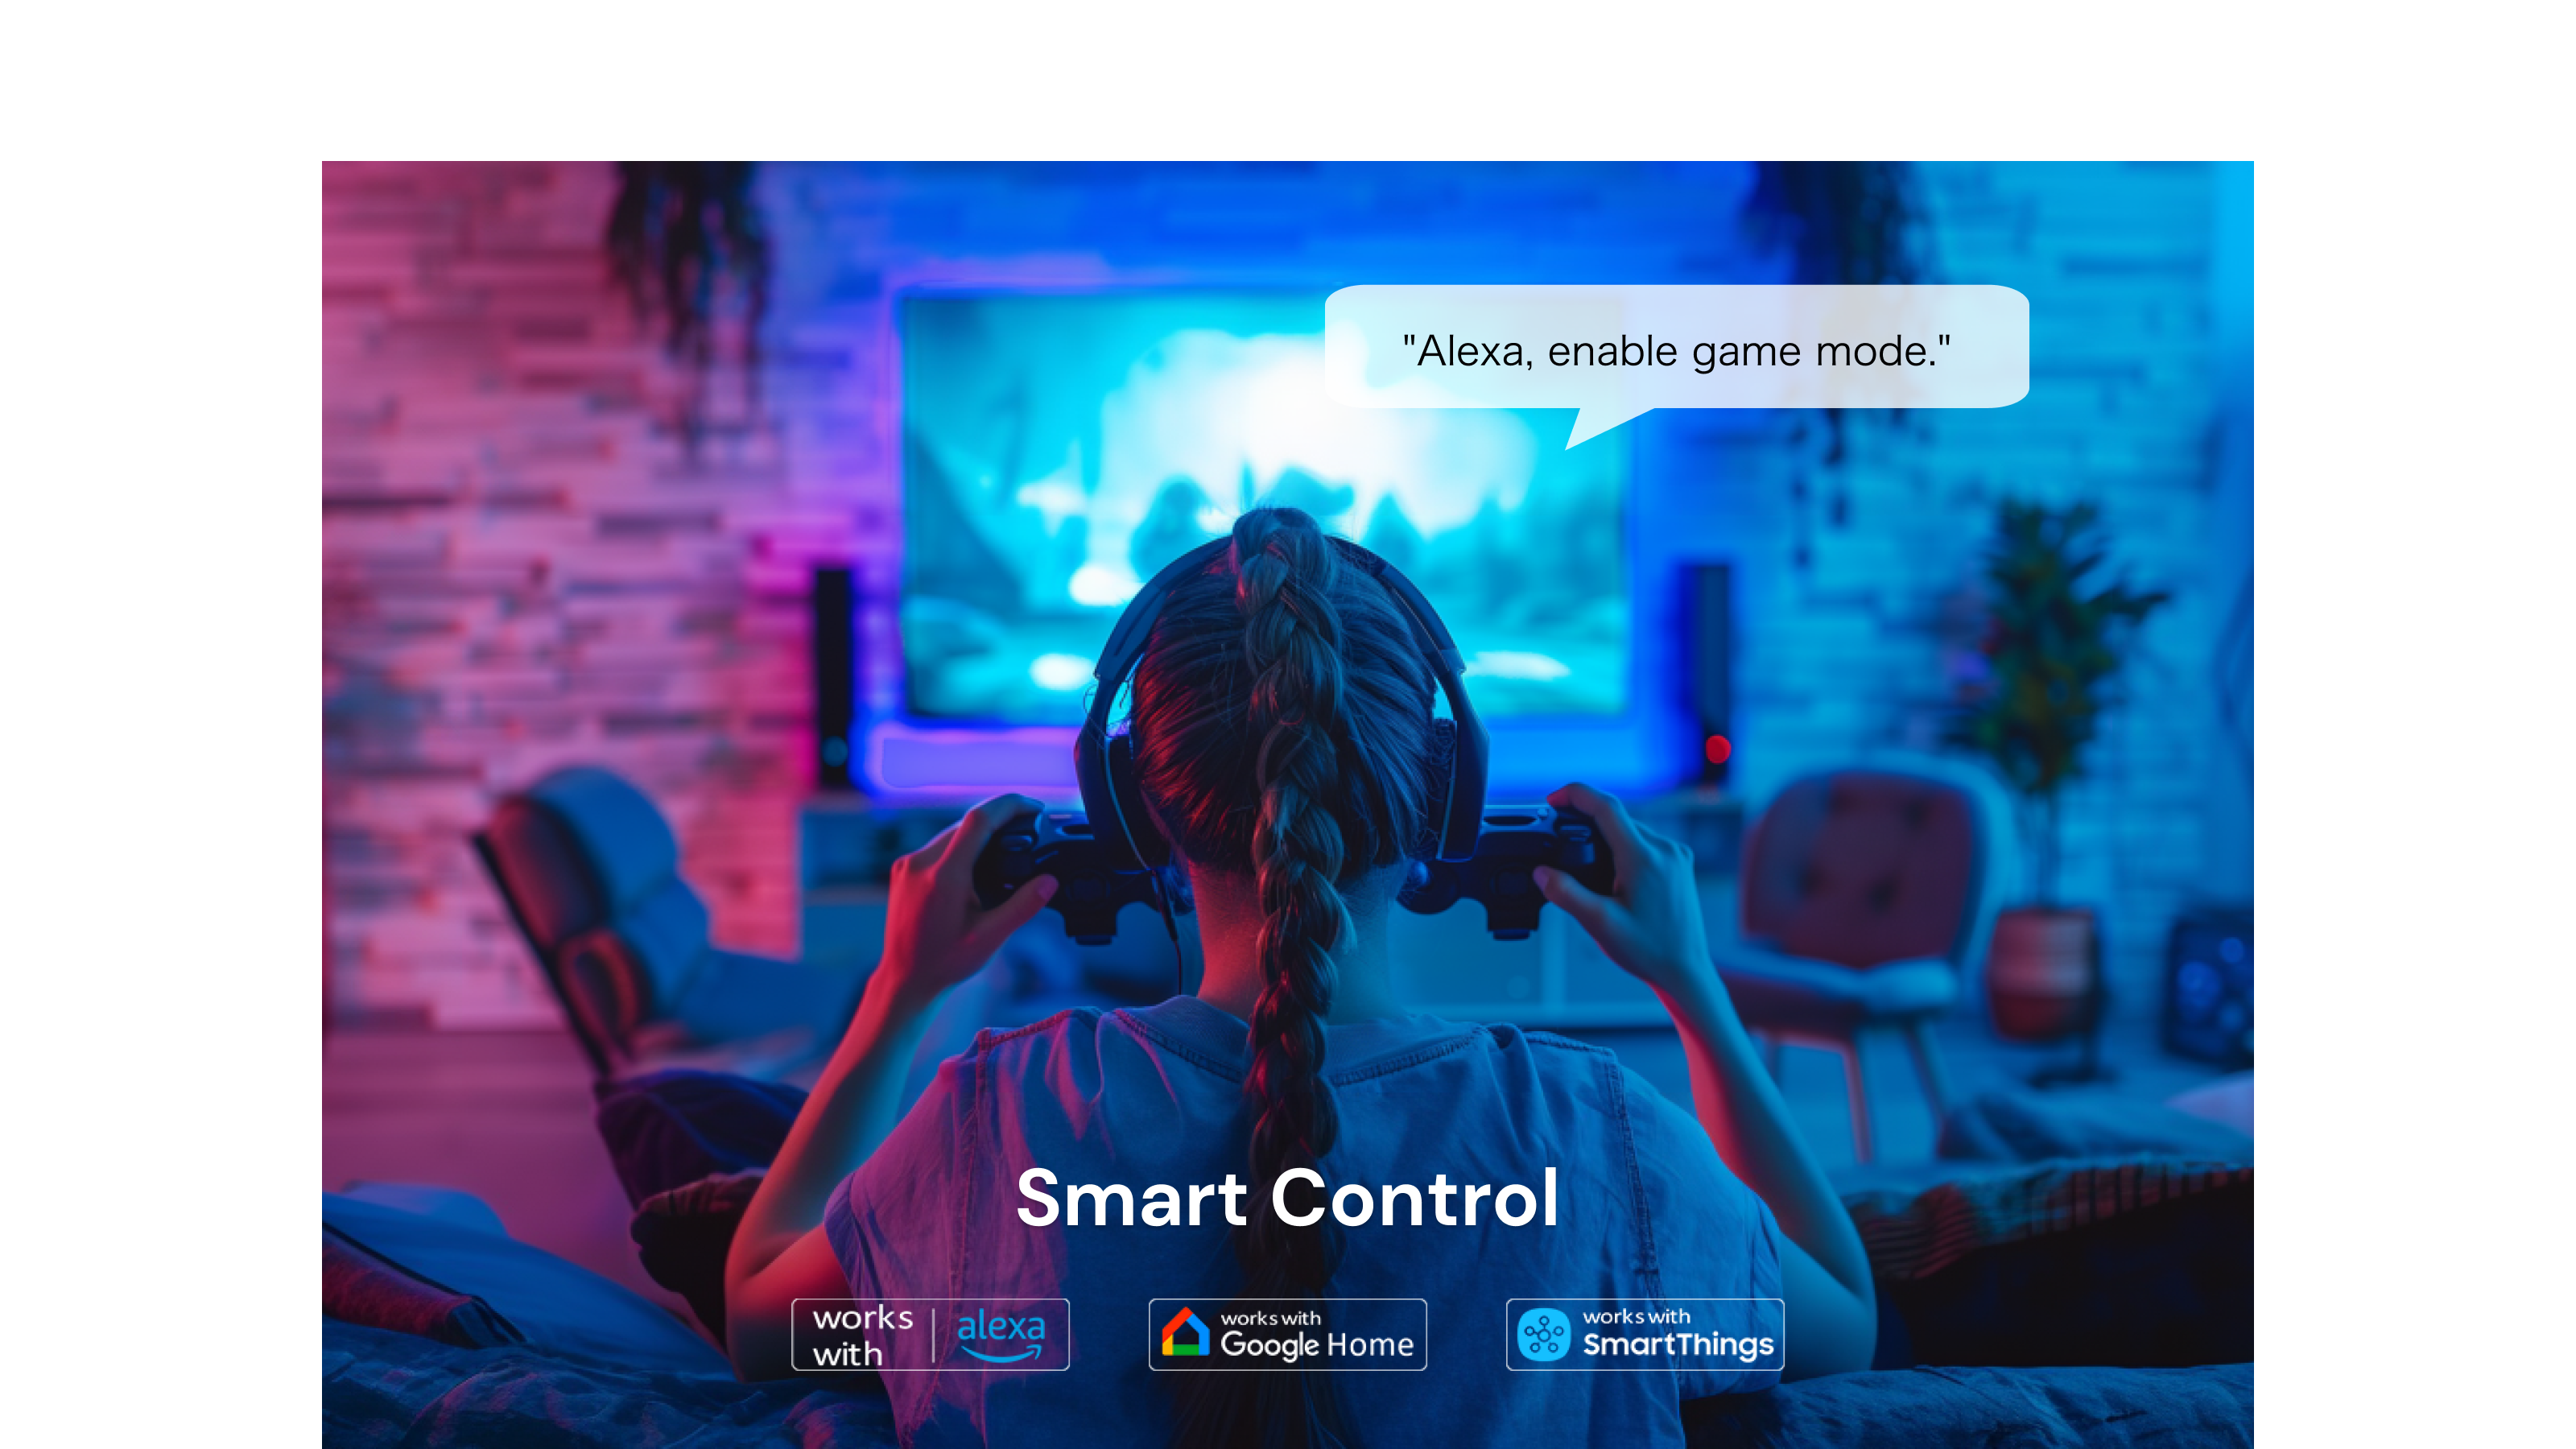 Hands-Free Voice Control: Compatible with Alexa, Google Assistant and SmartThings to control Wi-Fi LED strip lights, Power on/off, adjust brightness, or change colors, free up your hands and create the ambiance needed for a party.